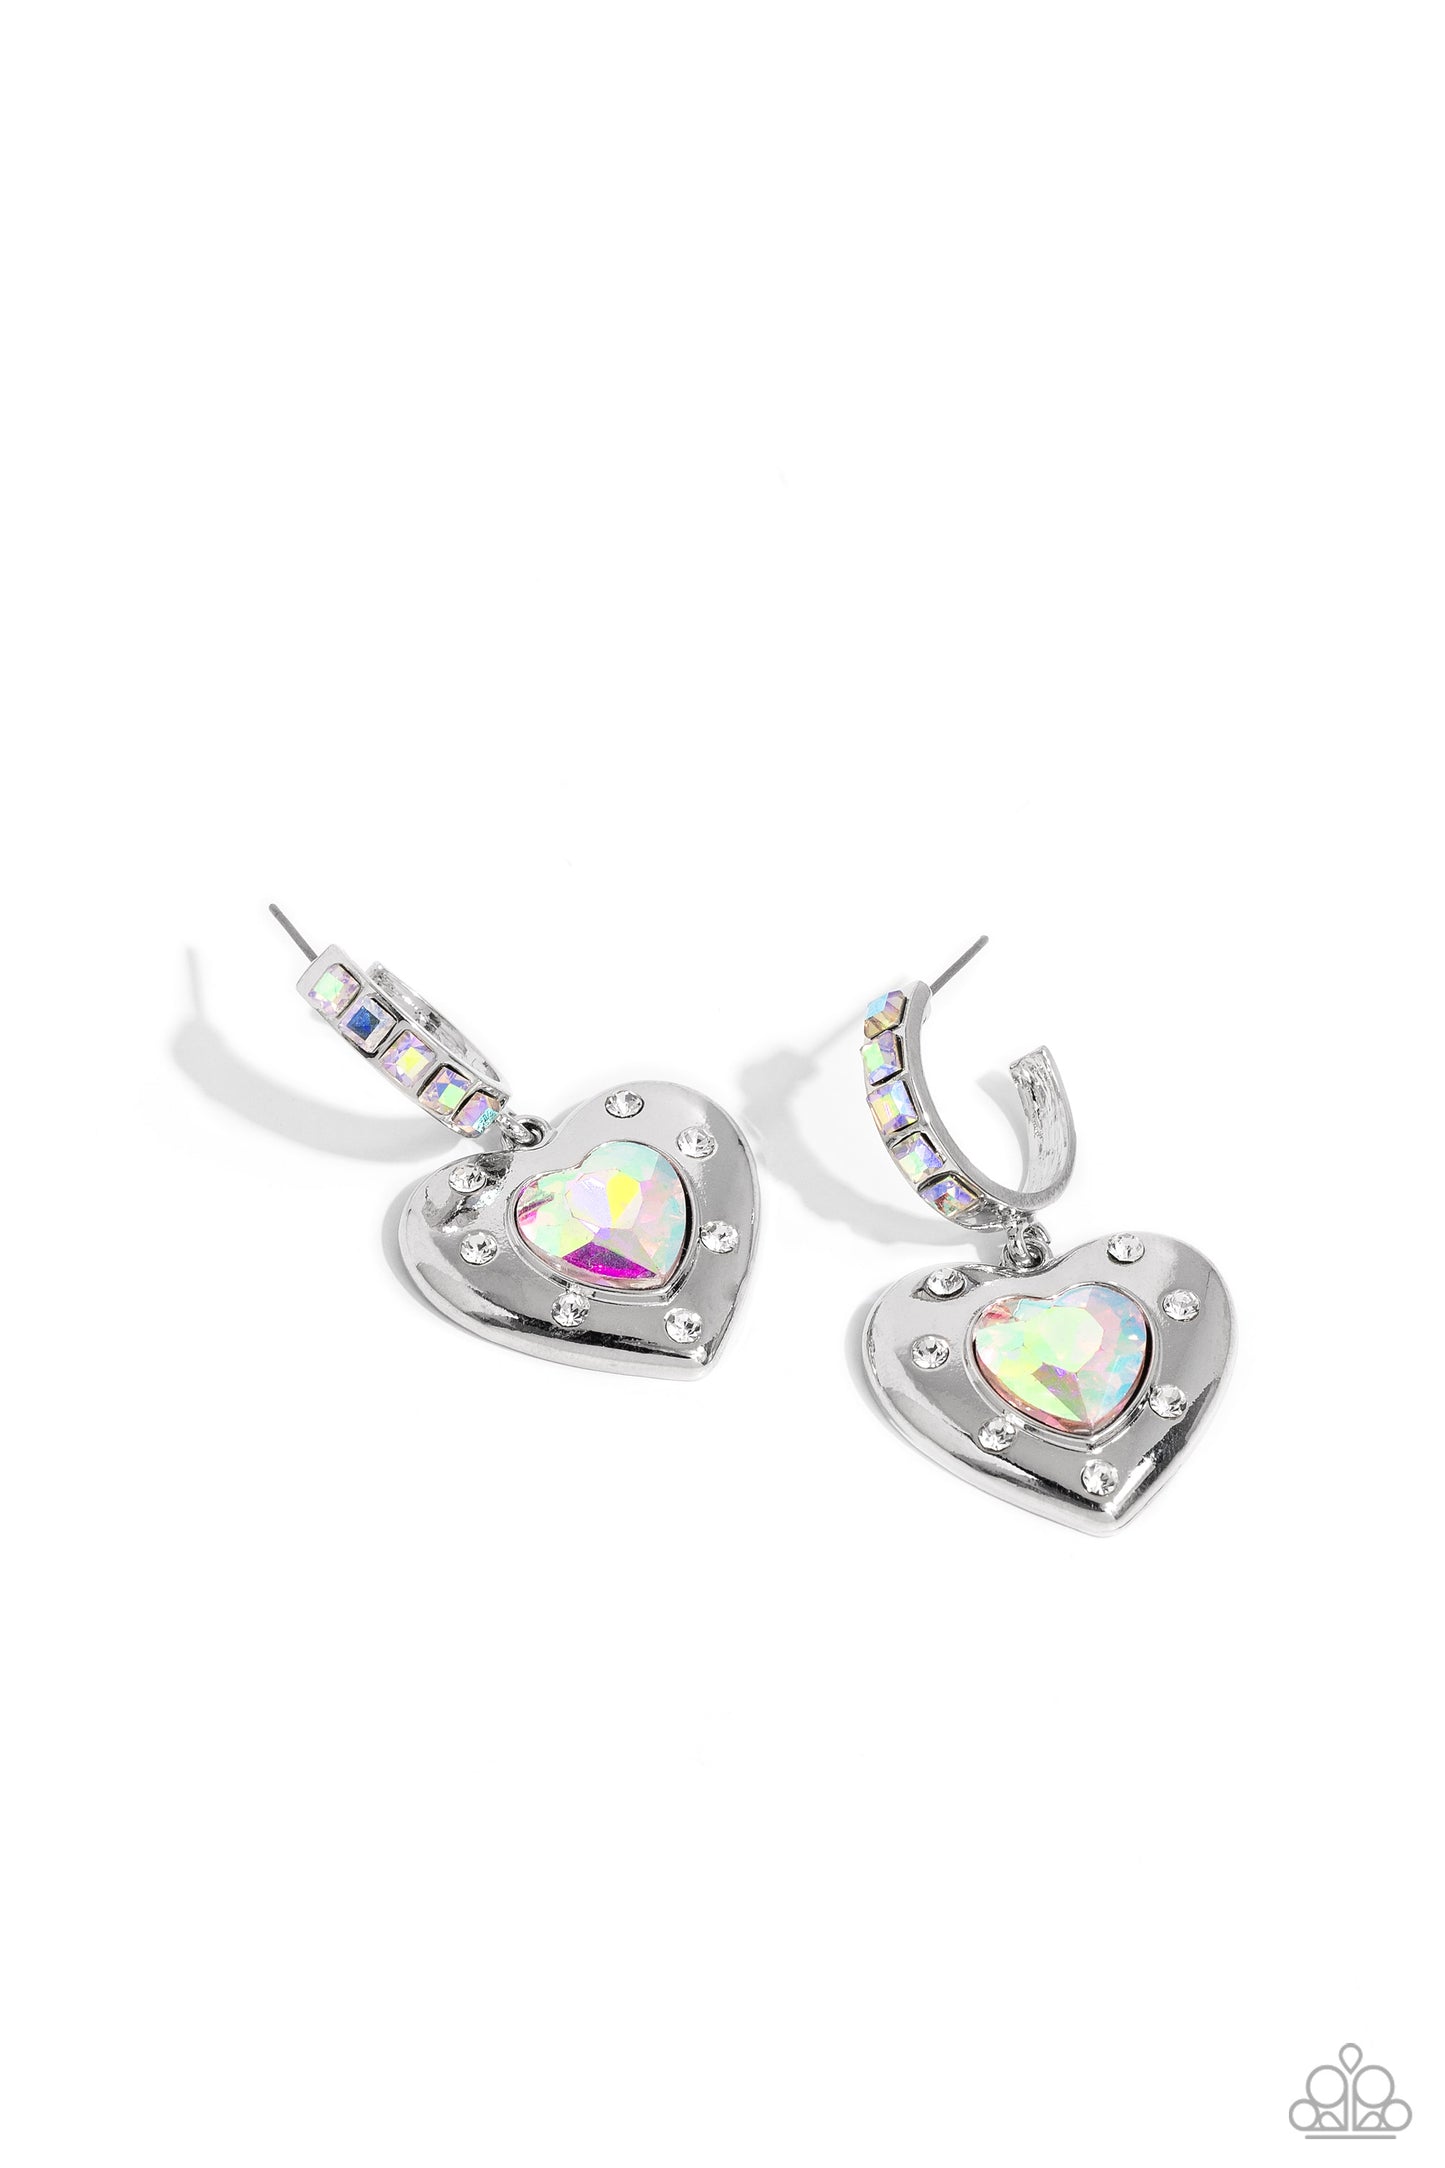 We Are Young White Heart Hoop Earring - Paparazzi Accessories  Featuring an iridescent shimmer, an iridescent heart gem is pressed into an antiqued silver heart frame adorned in white rhinestones. The antiqued heart sways from the bottom of a thick silver hoop encrusted in square iridescent gems resulting in a whimsical fashion. Earring attaches to a standard post fitting. Hoop measures approximately 3/4" in diameter. Due to its prismatic palette, color may vary.